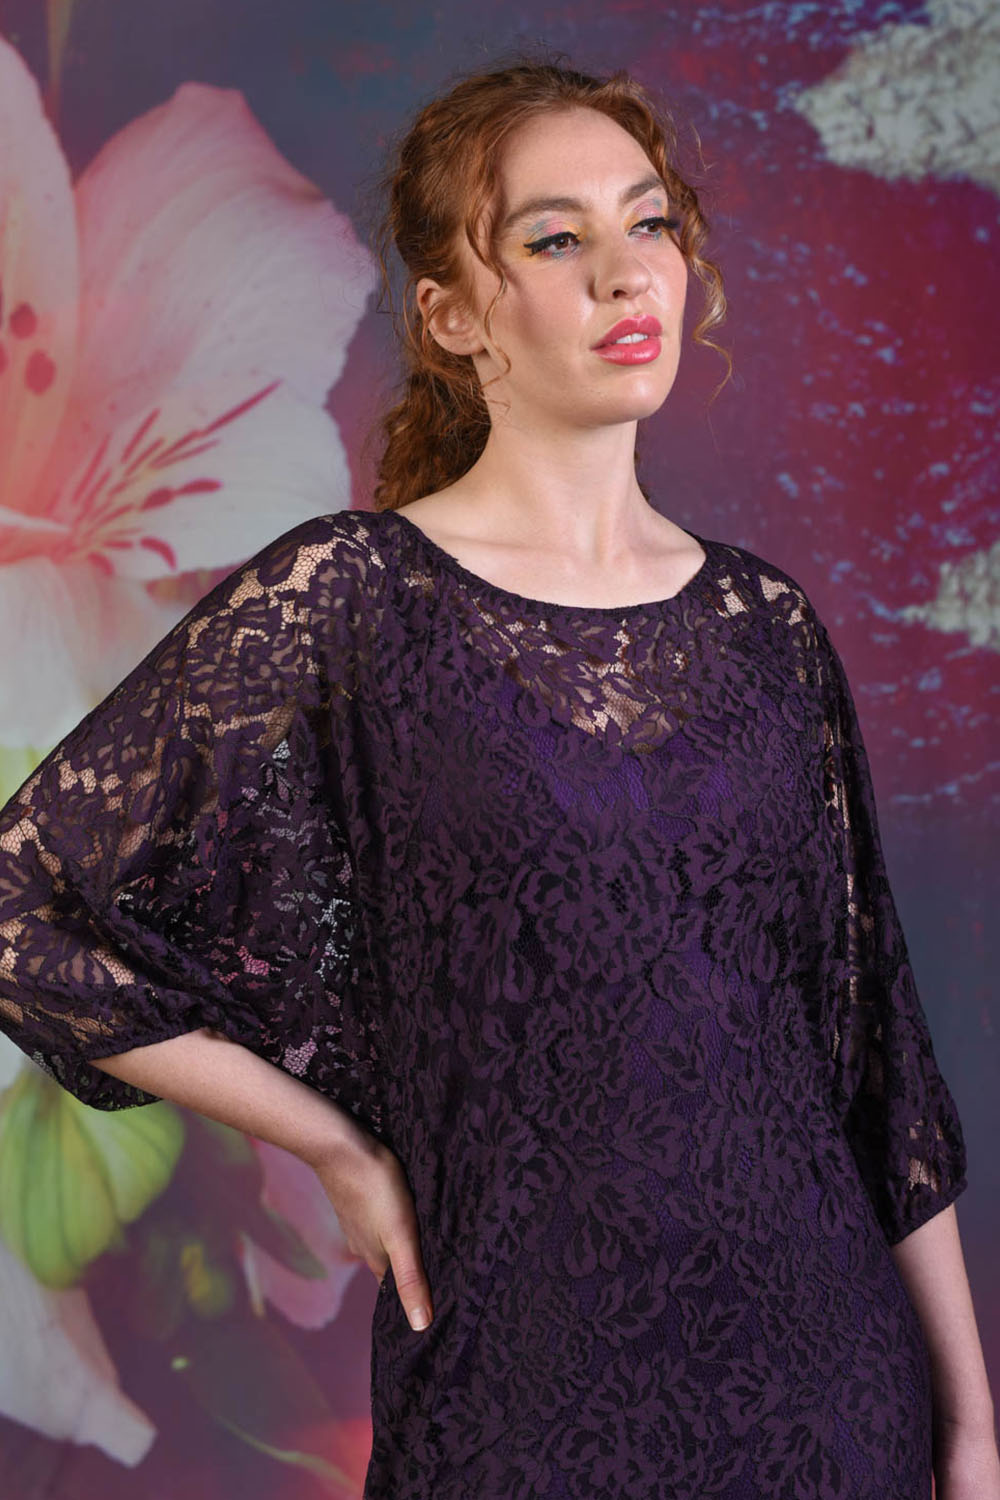 Close-up of model wearing the Annah Stretton Blair Lace dress in purple